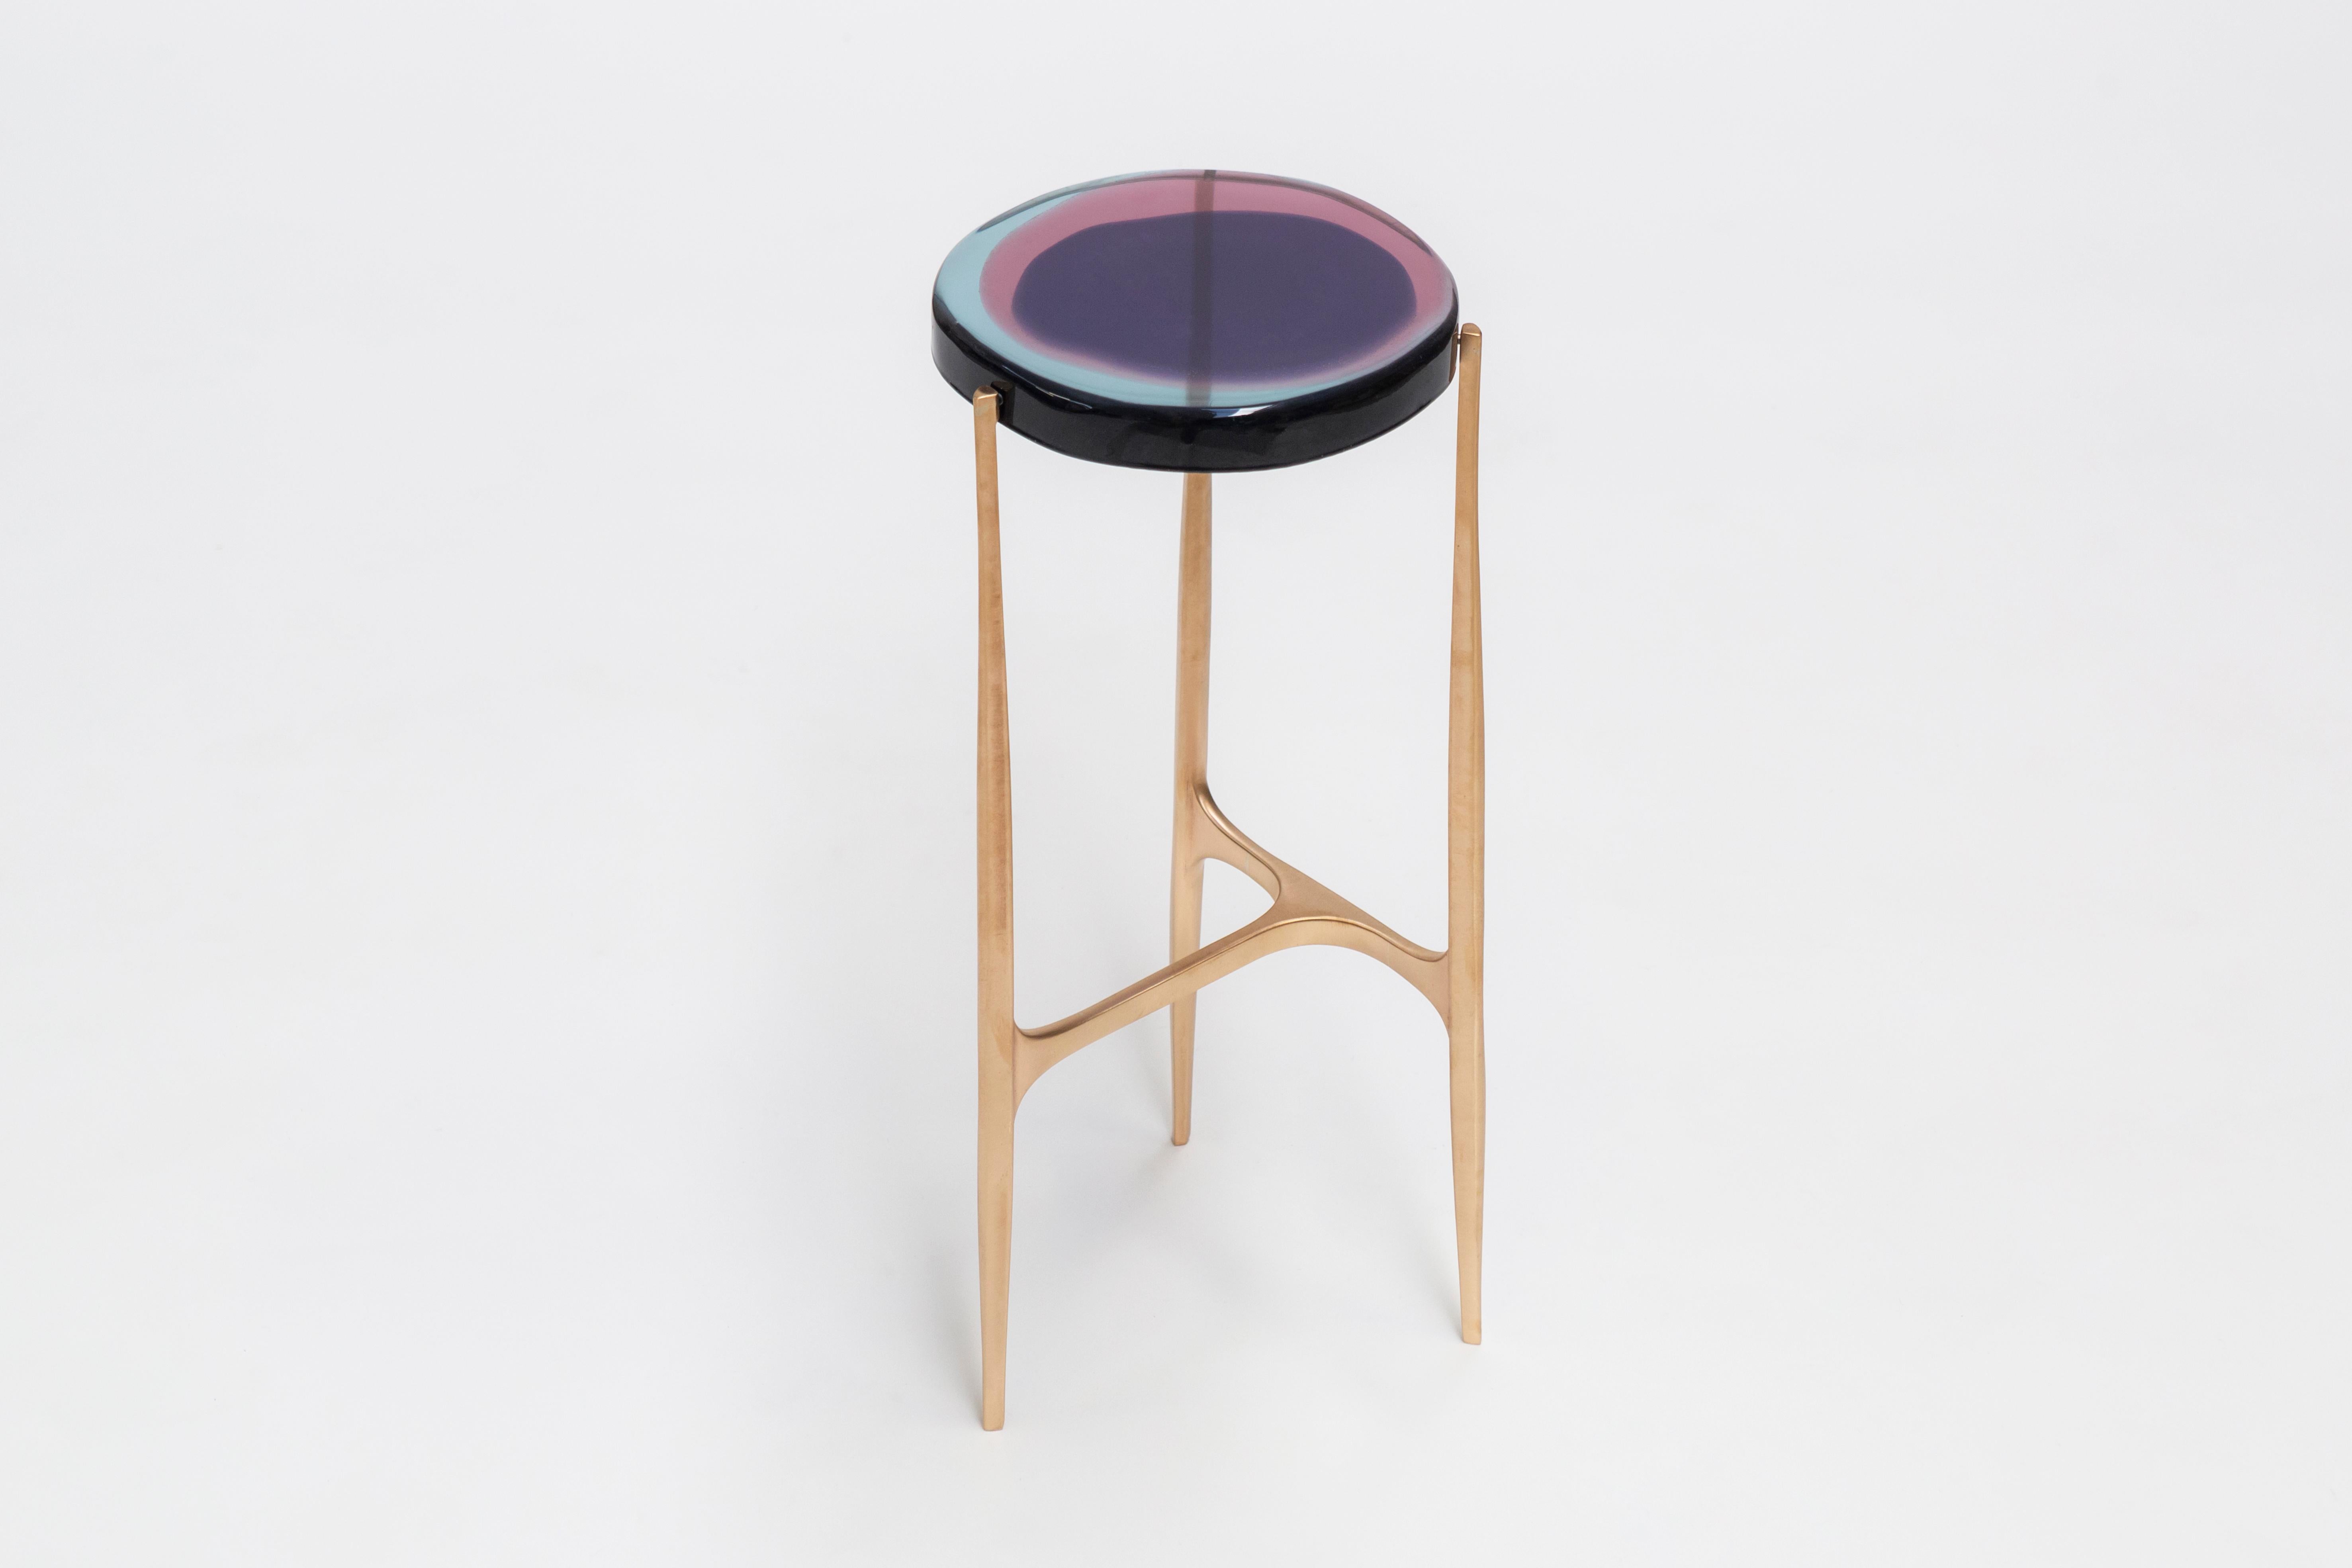 Agatha coffee table by Draga & Aurel
Dimensions: W 24 x D 24 x H 56
Top Ø 24 cm
Materials: Resin and bronze

The Agatha coffee tables are featured by irregular circular tops of transparent and
colorful resin sit on a bronze frame with a